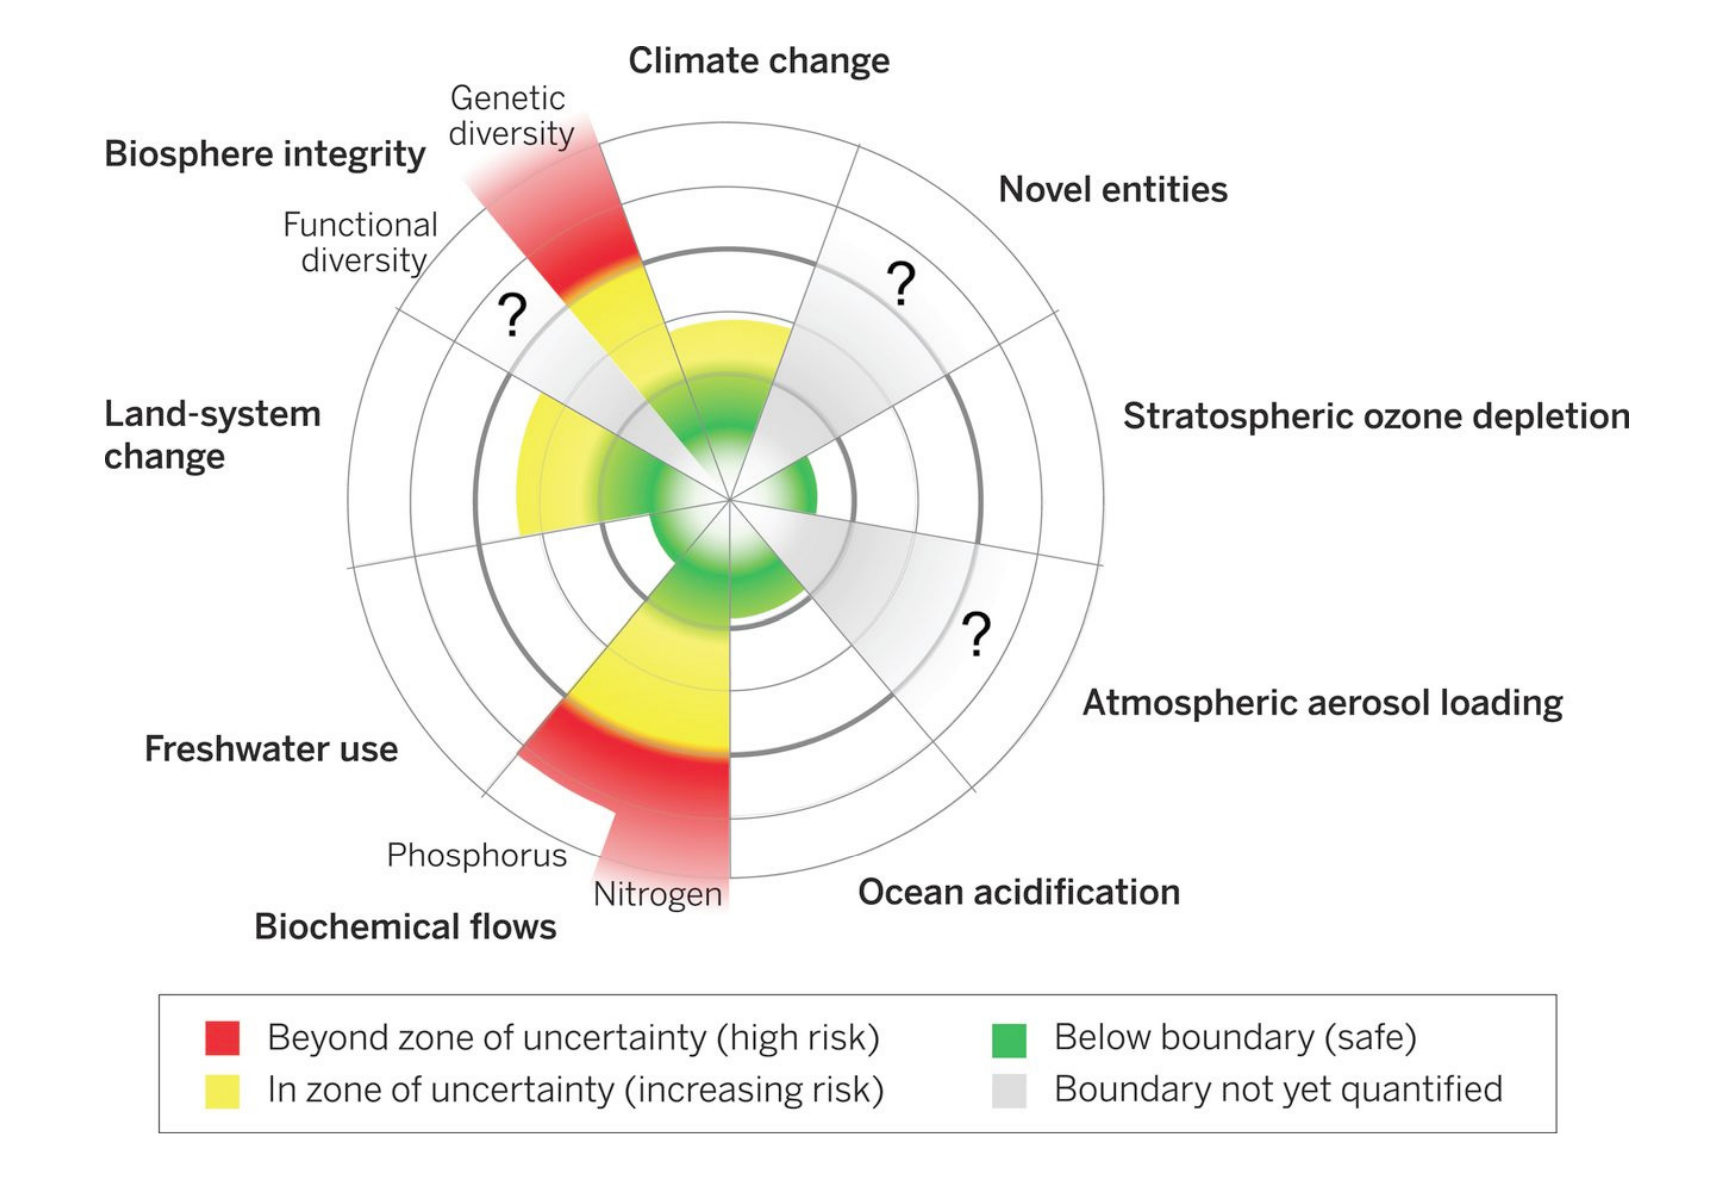 Figure 18: Planetary boundaries: estimated tipping points for changes in earth system functioning in relation to current human influence.